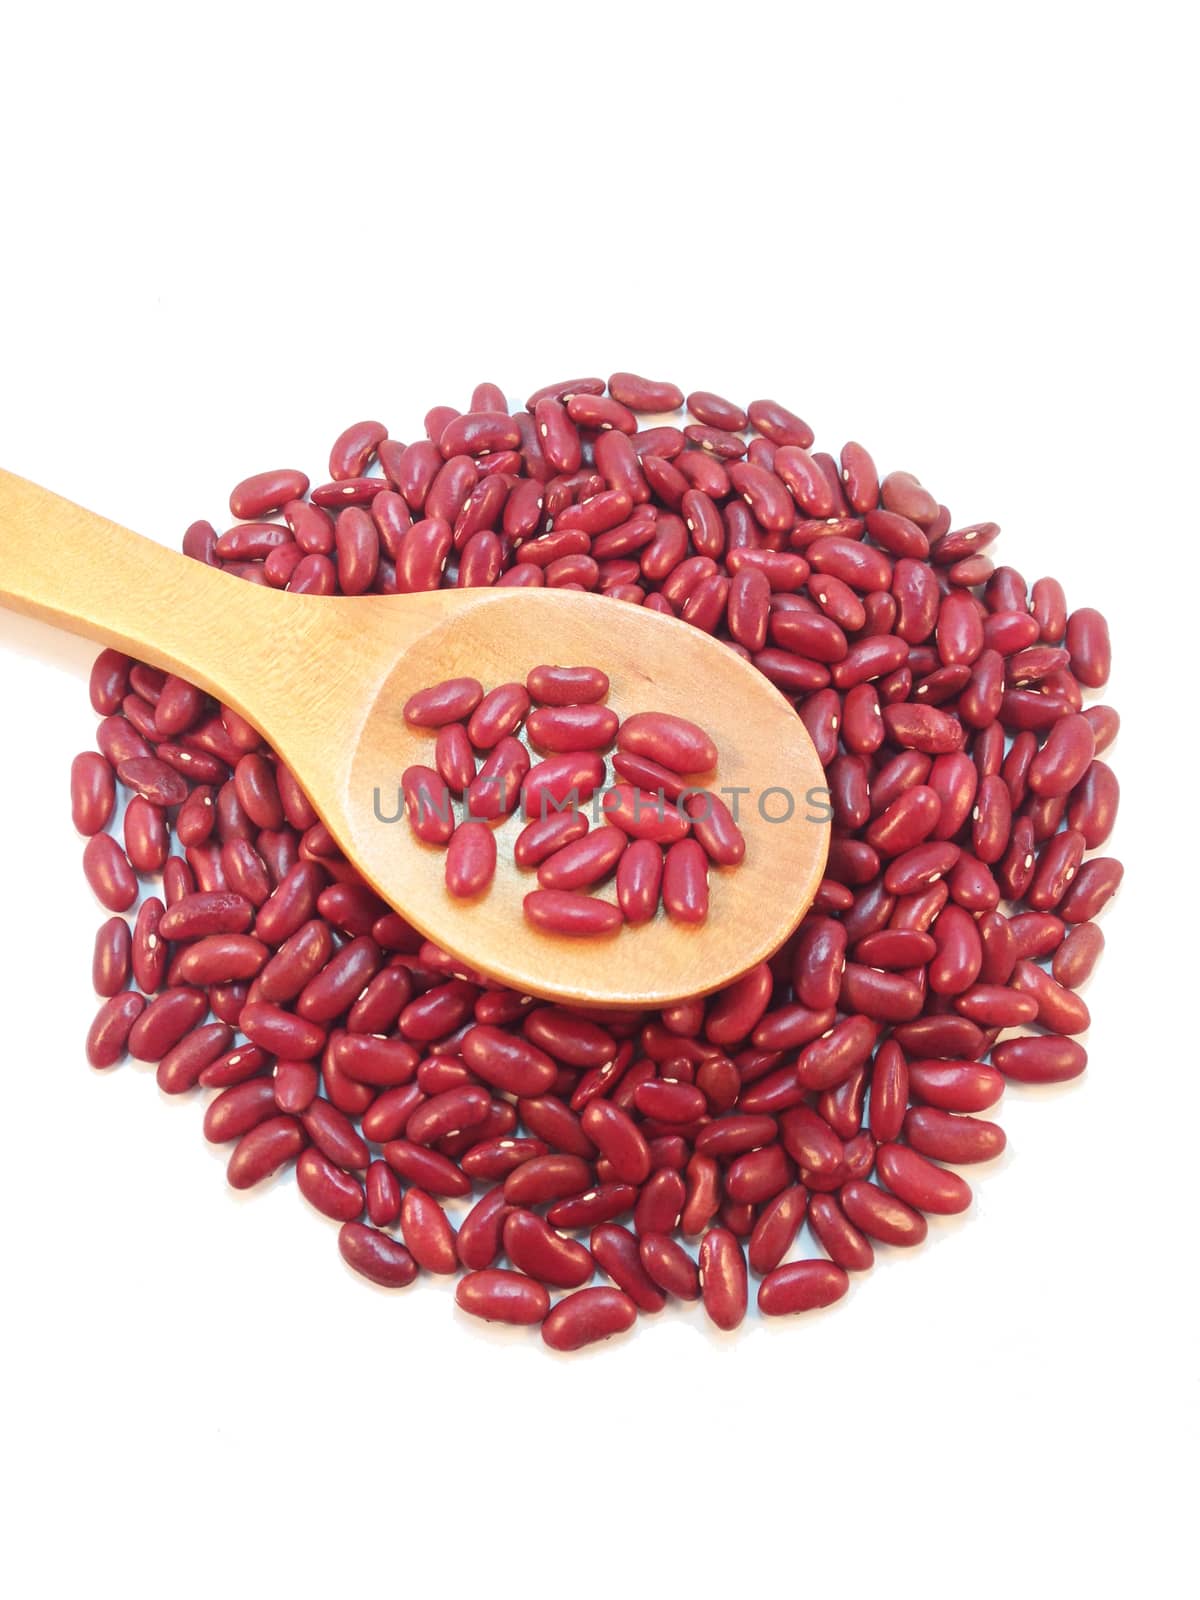 Red Bean on wooden spoon on white background